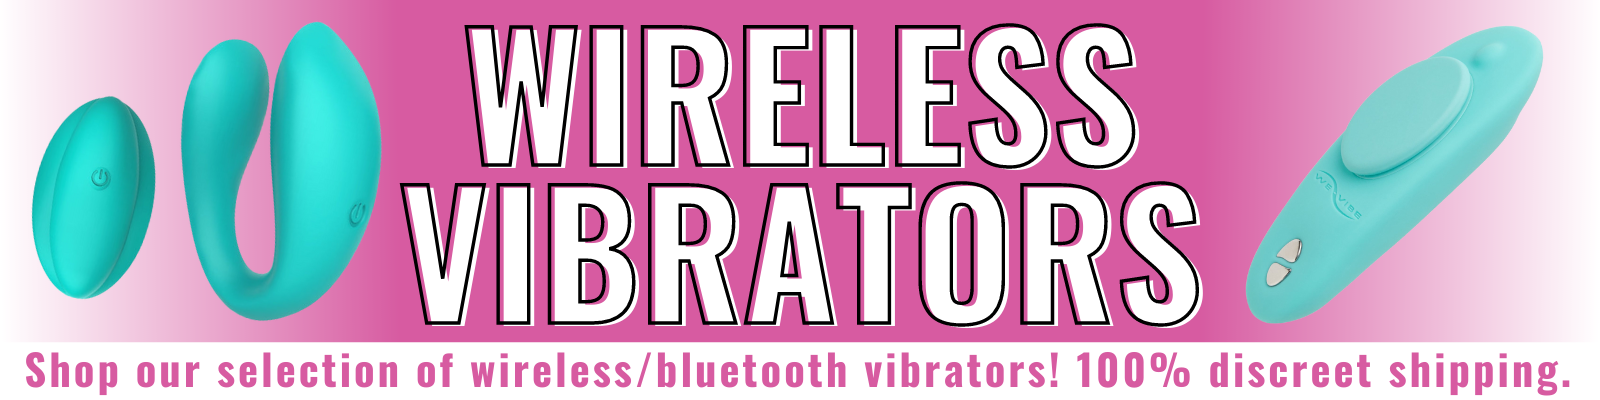 Banner for our bluetooth and wireless vibrators collection. Banner reads: Wireless vibrators. Shop our selection of wireless/bluetooth vibrators! 100% discreet shipping.